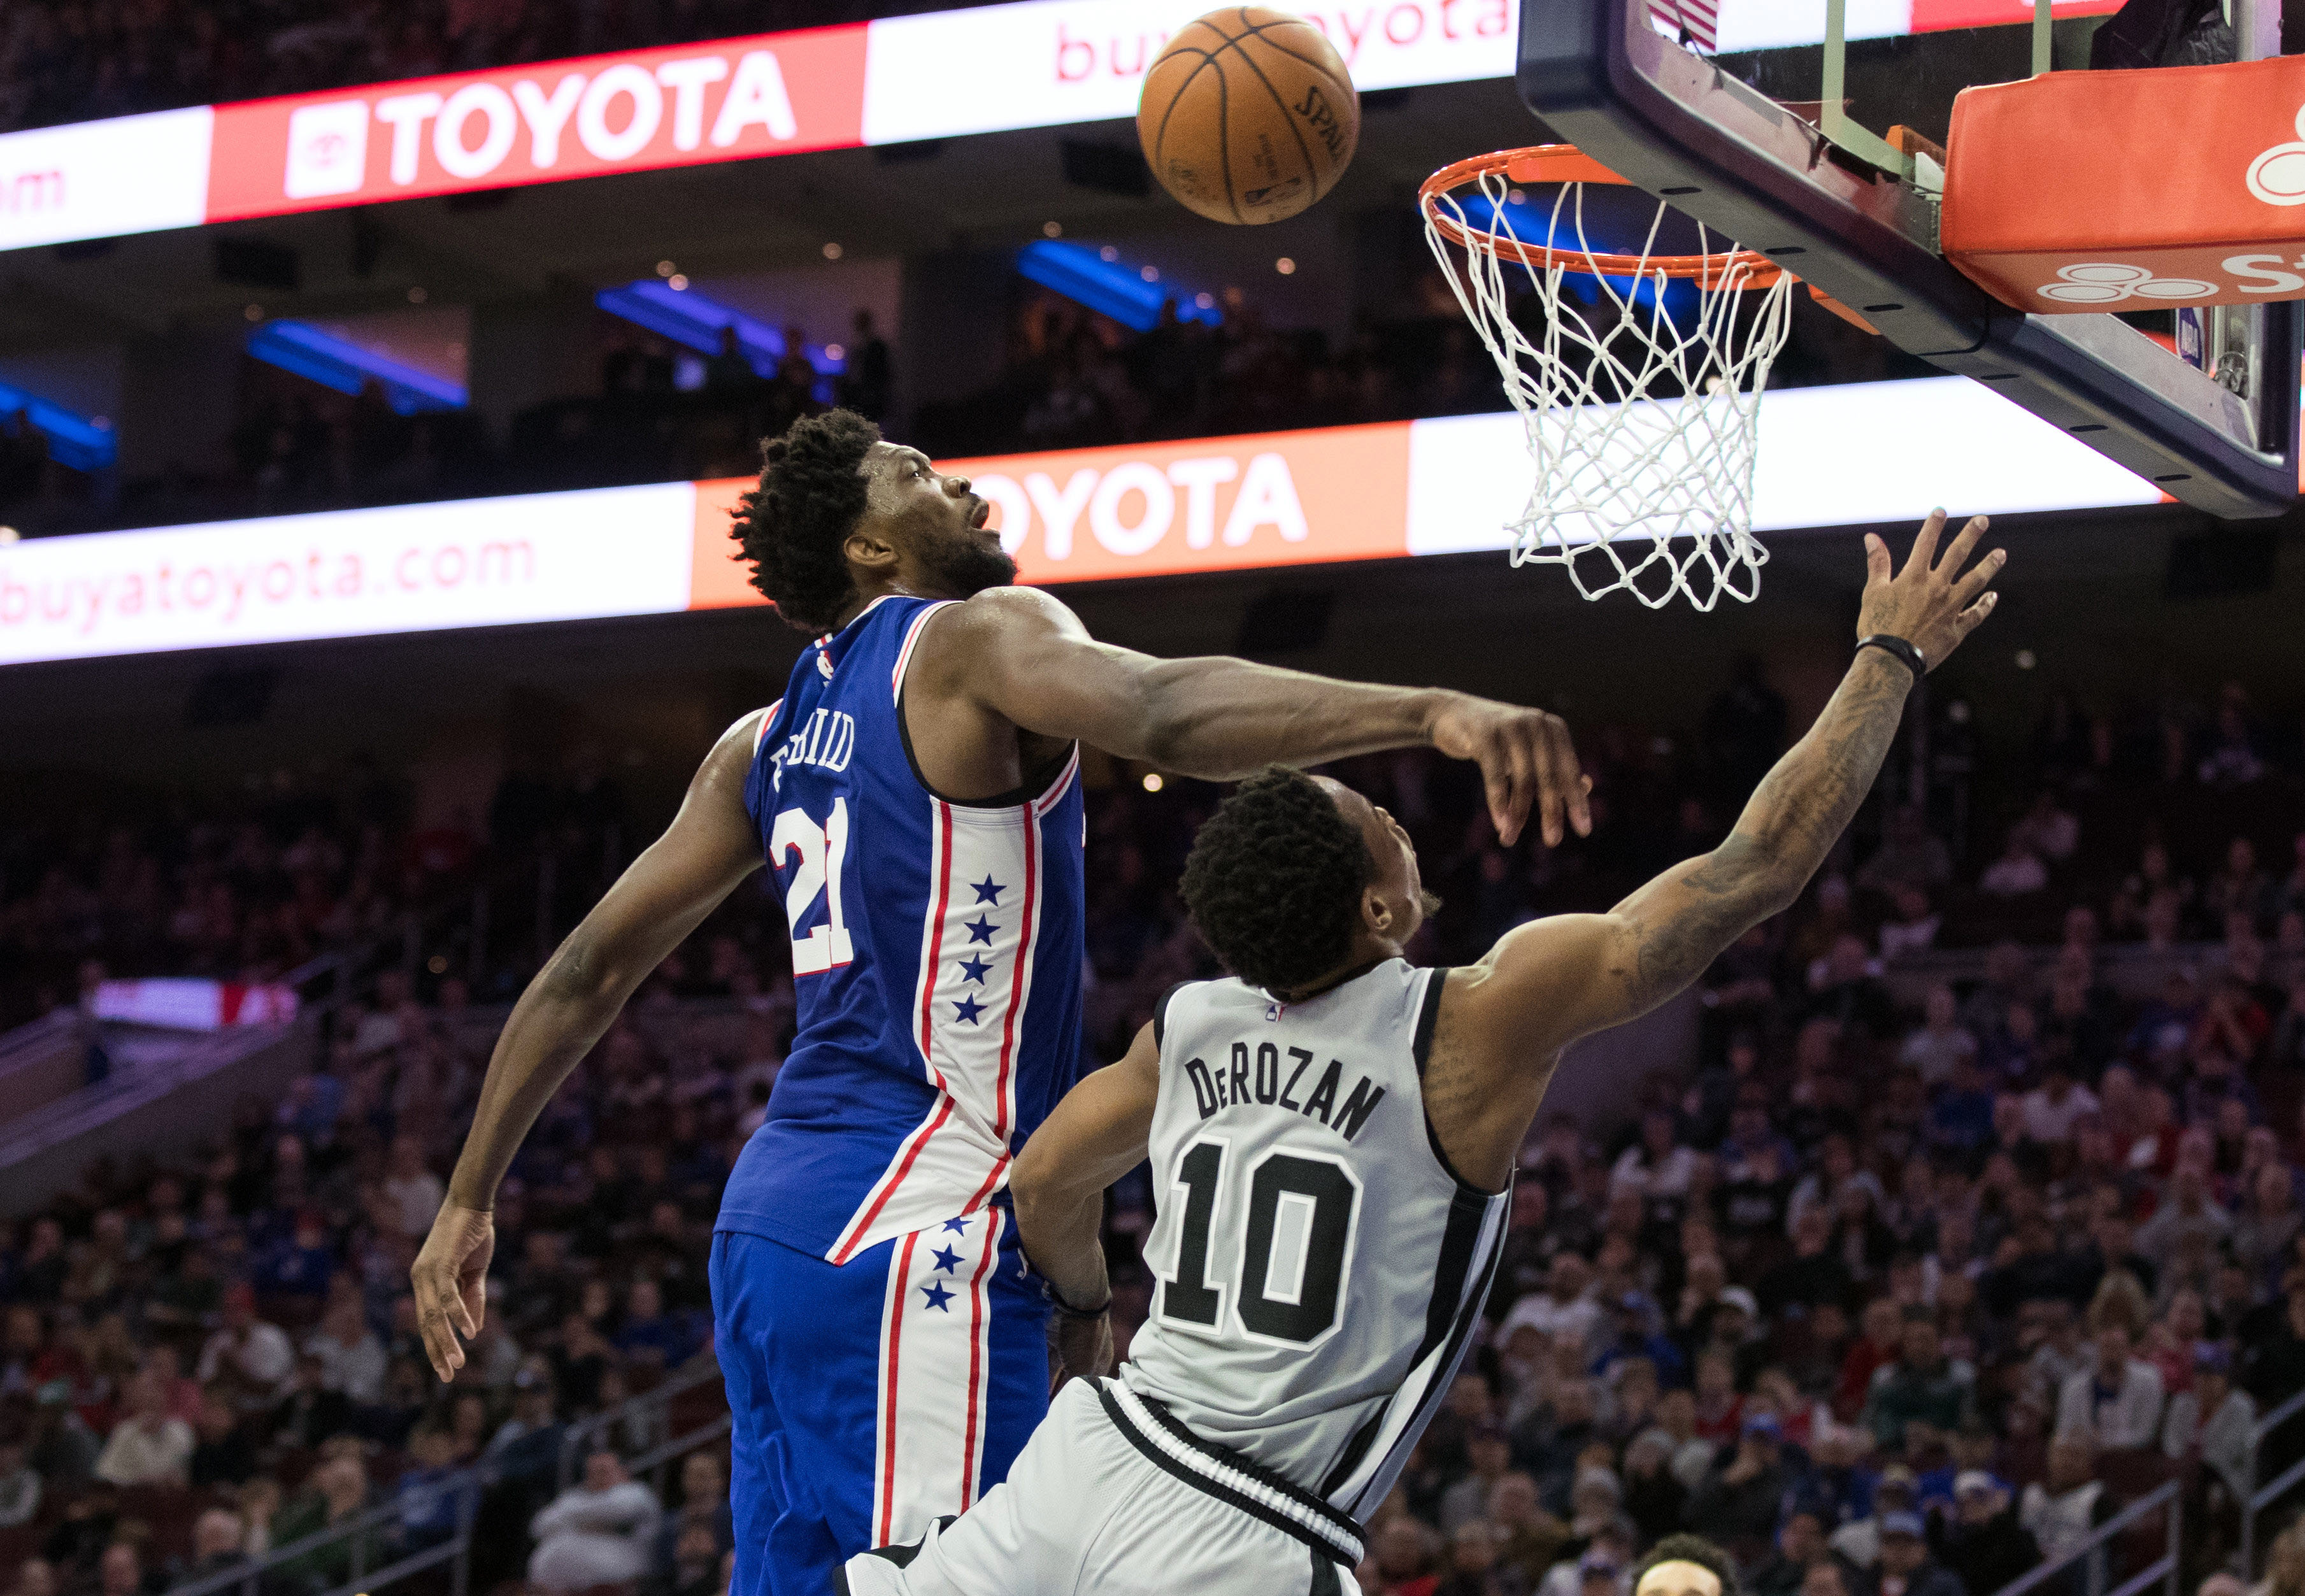 Why Were Joel Embiid and Ben Simmons Both Off the Floor Last Night?